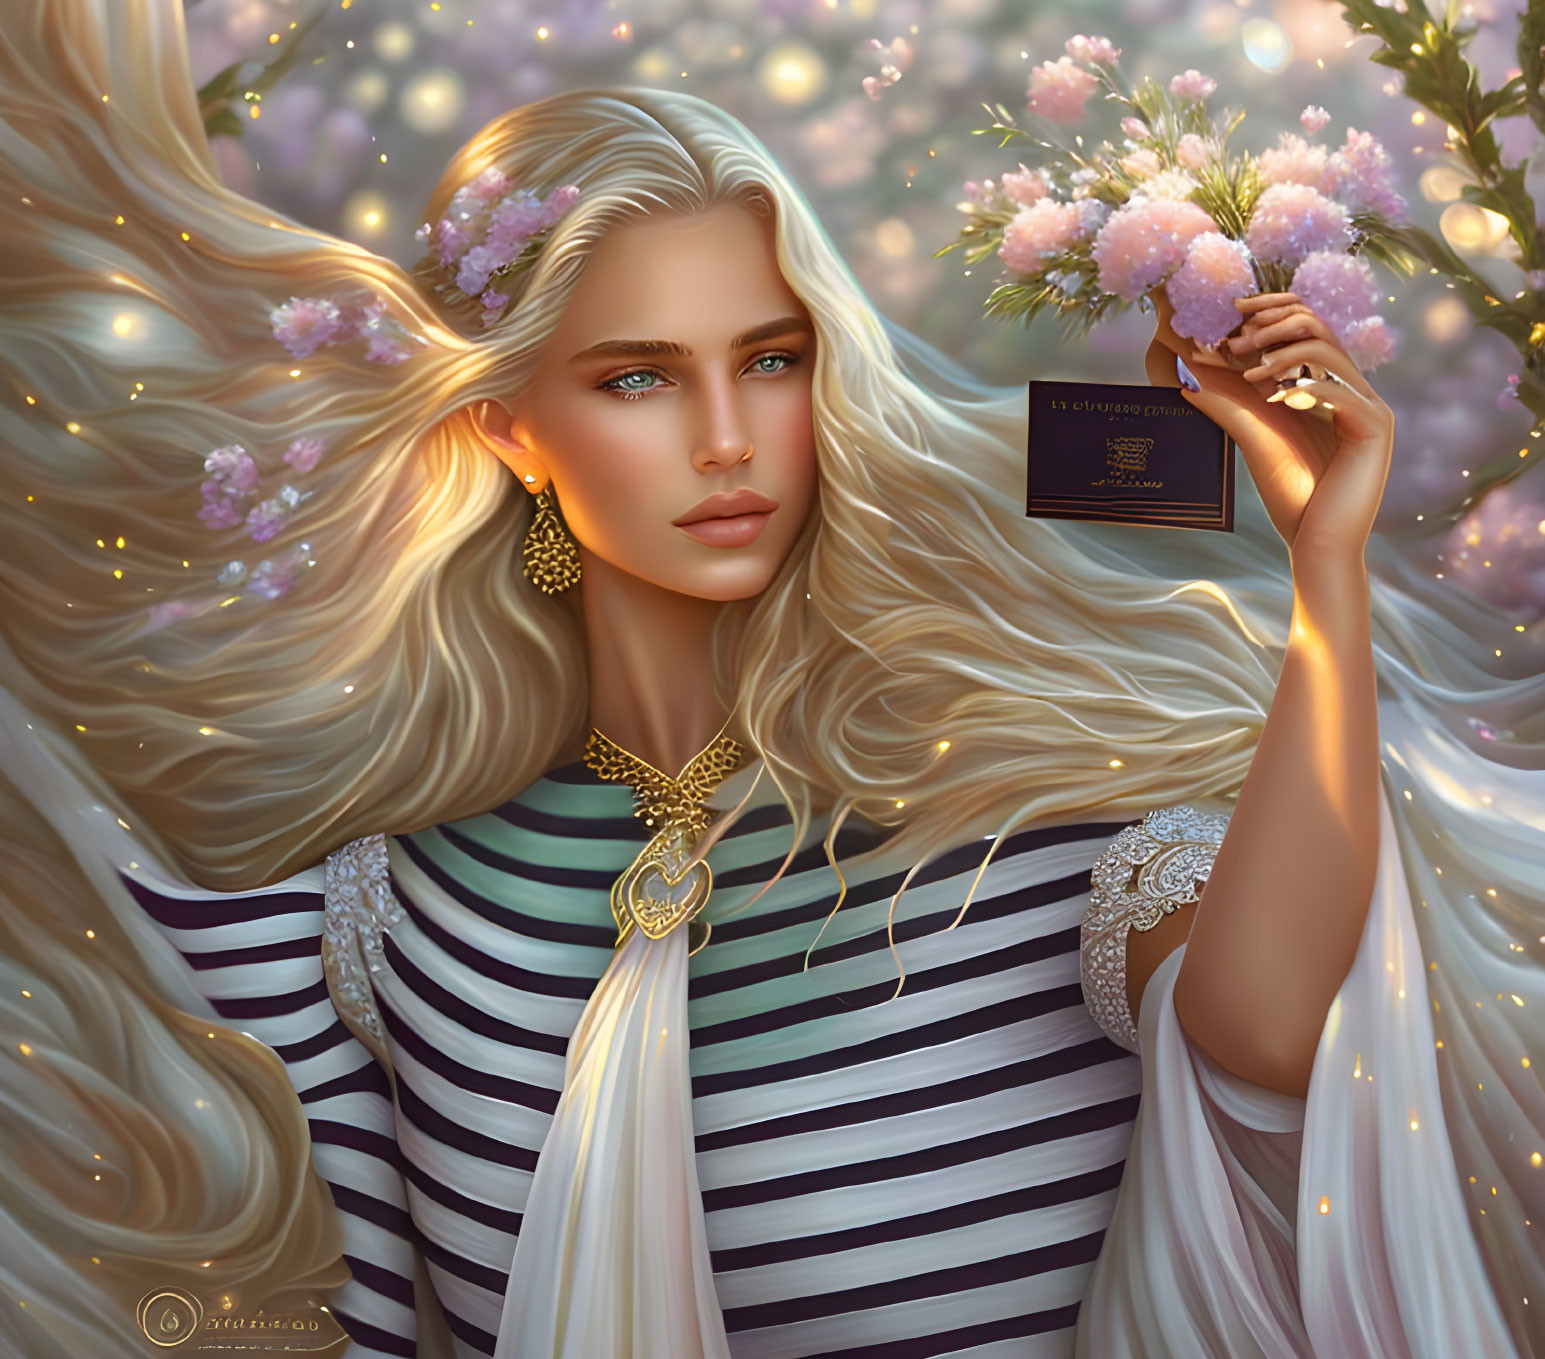 Blonde woman with flowers in magical golden setting